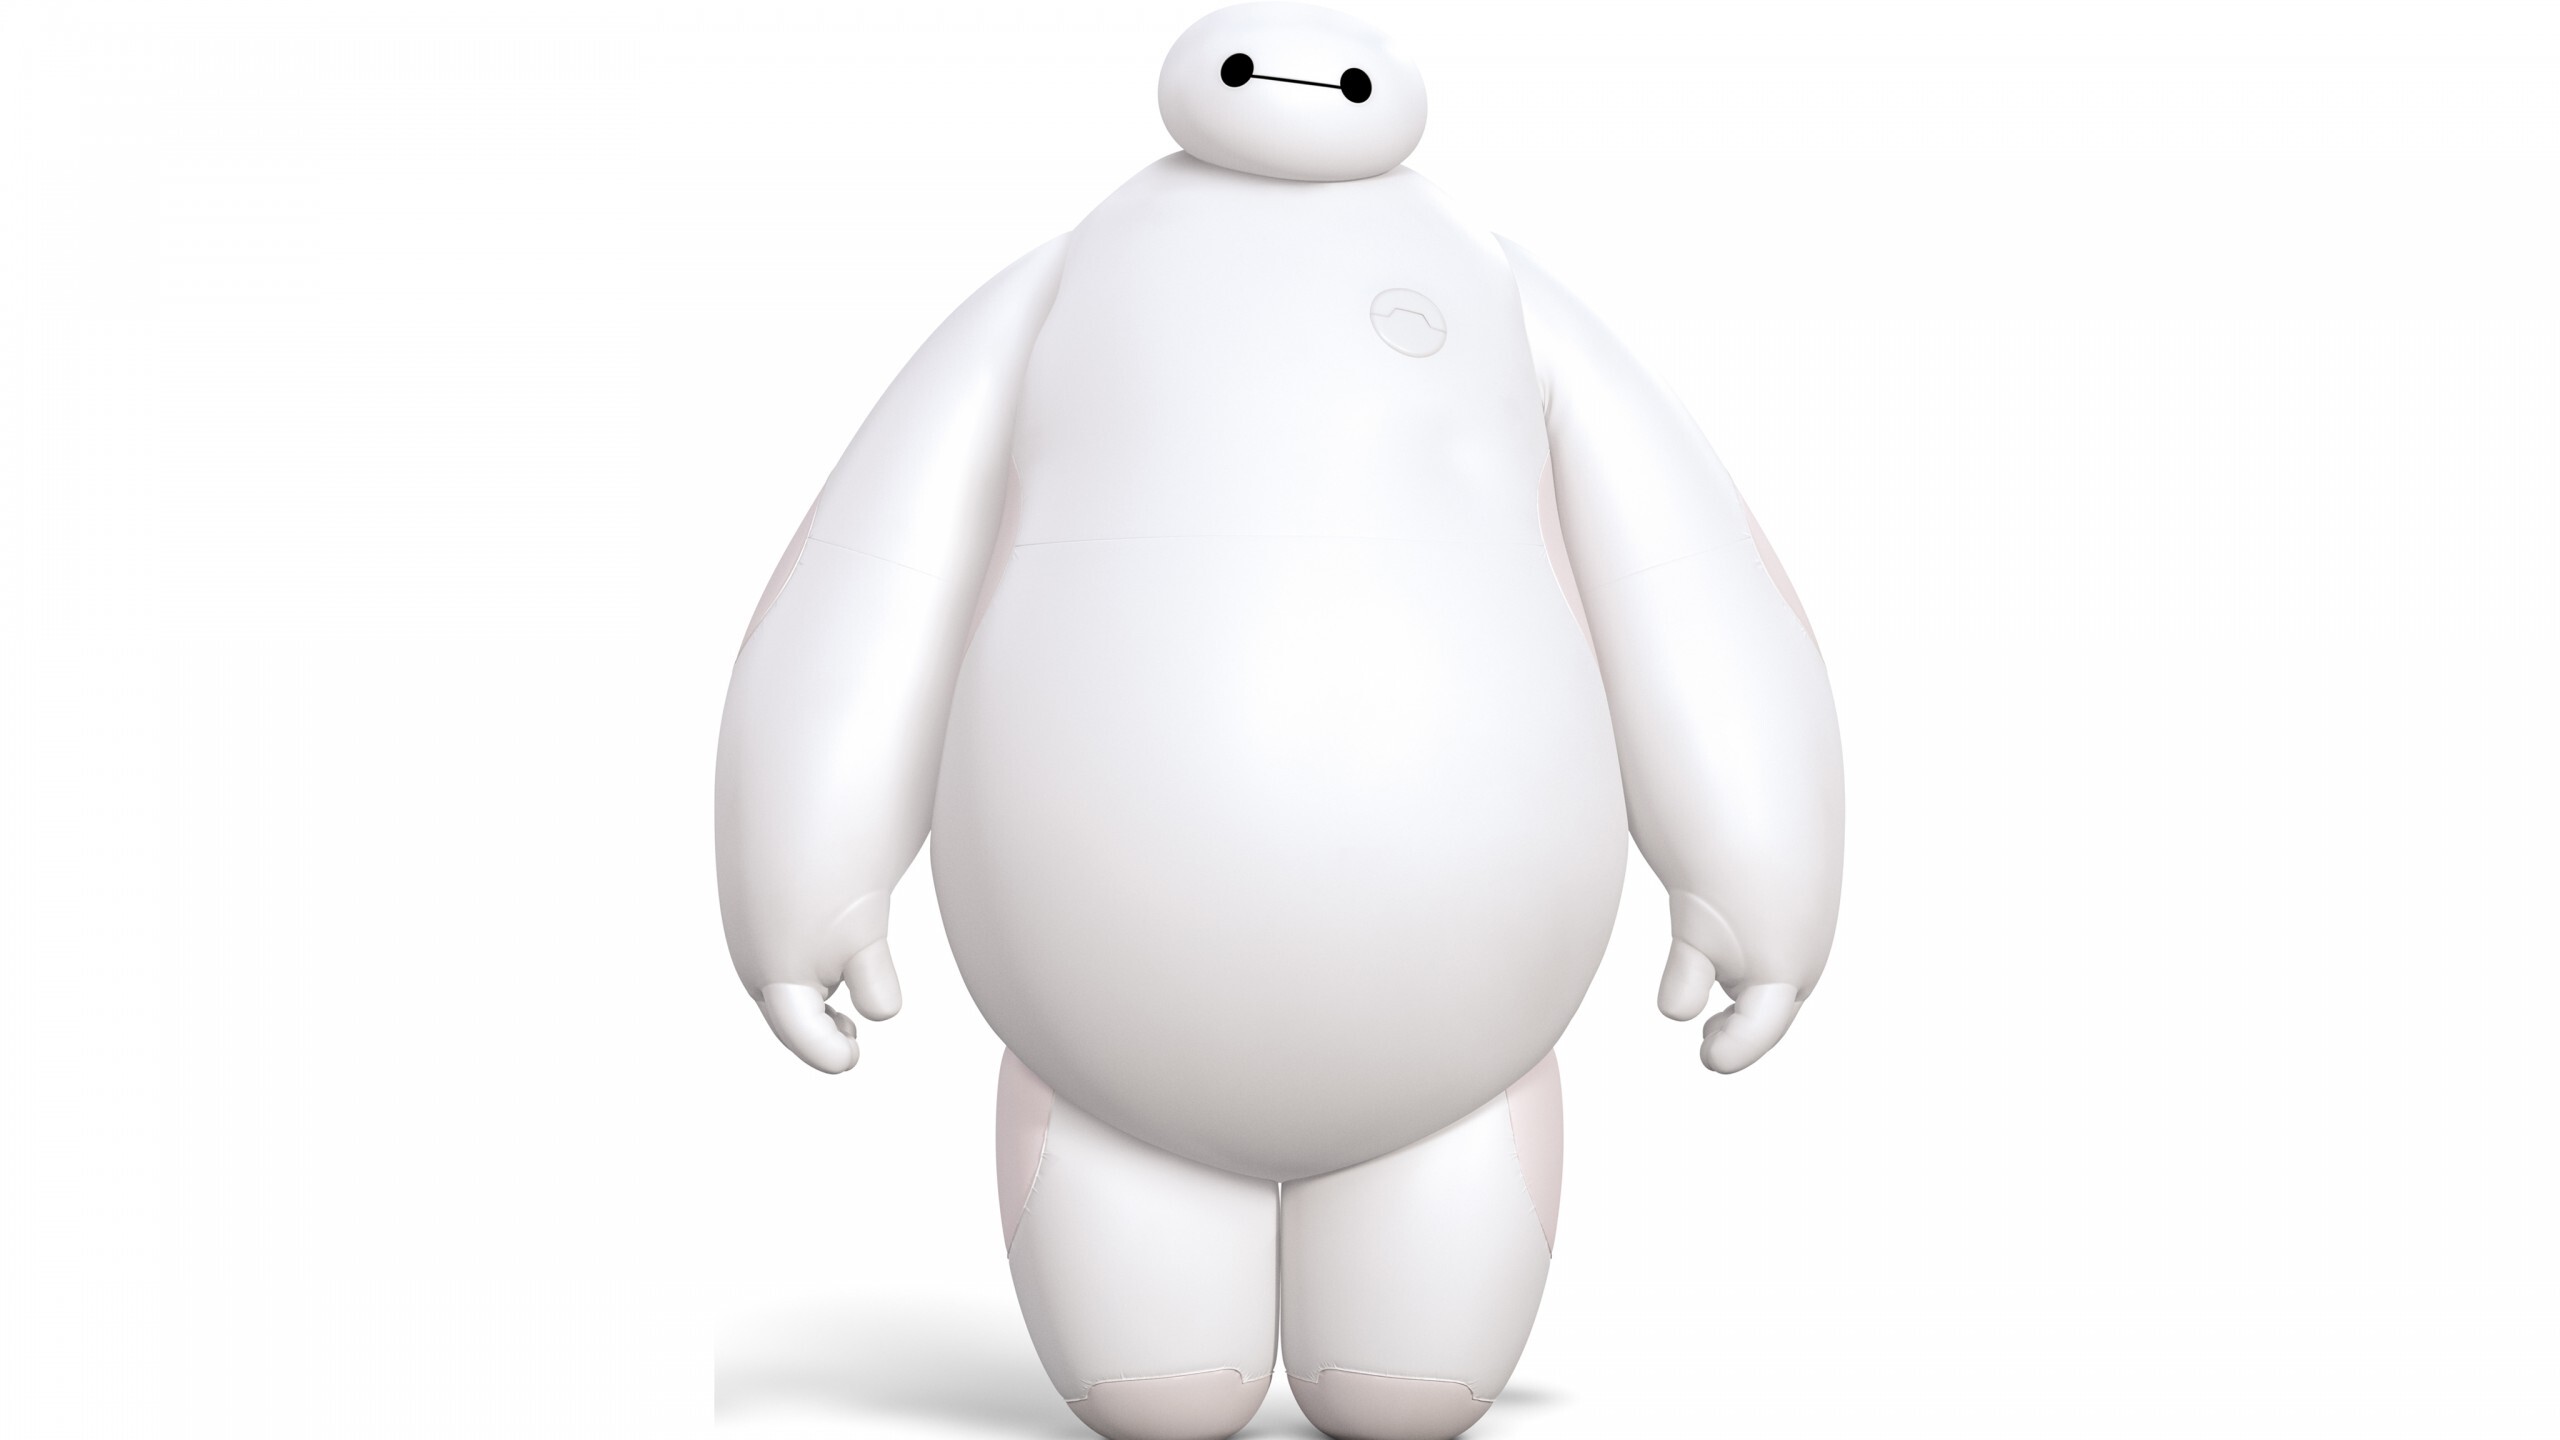 Baymax! (TV Series): The second television series set in the Big Hero 6 continuity, following Big Hero 6: The Series. 2560x1440 HD Wallpaper.